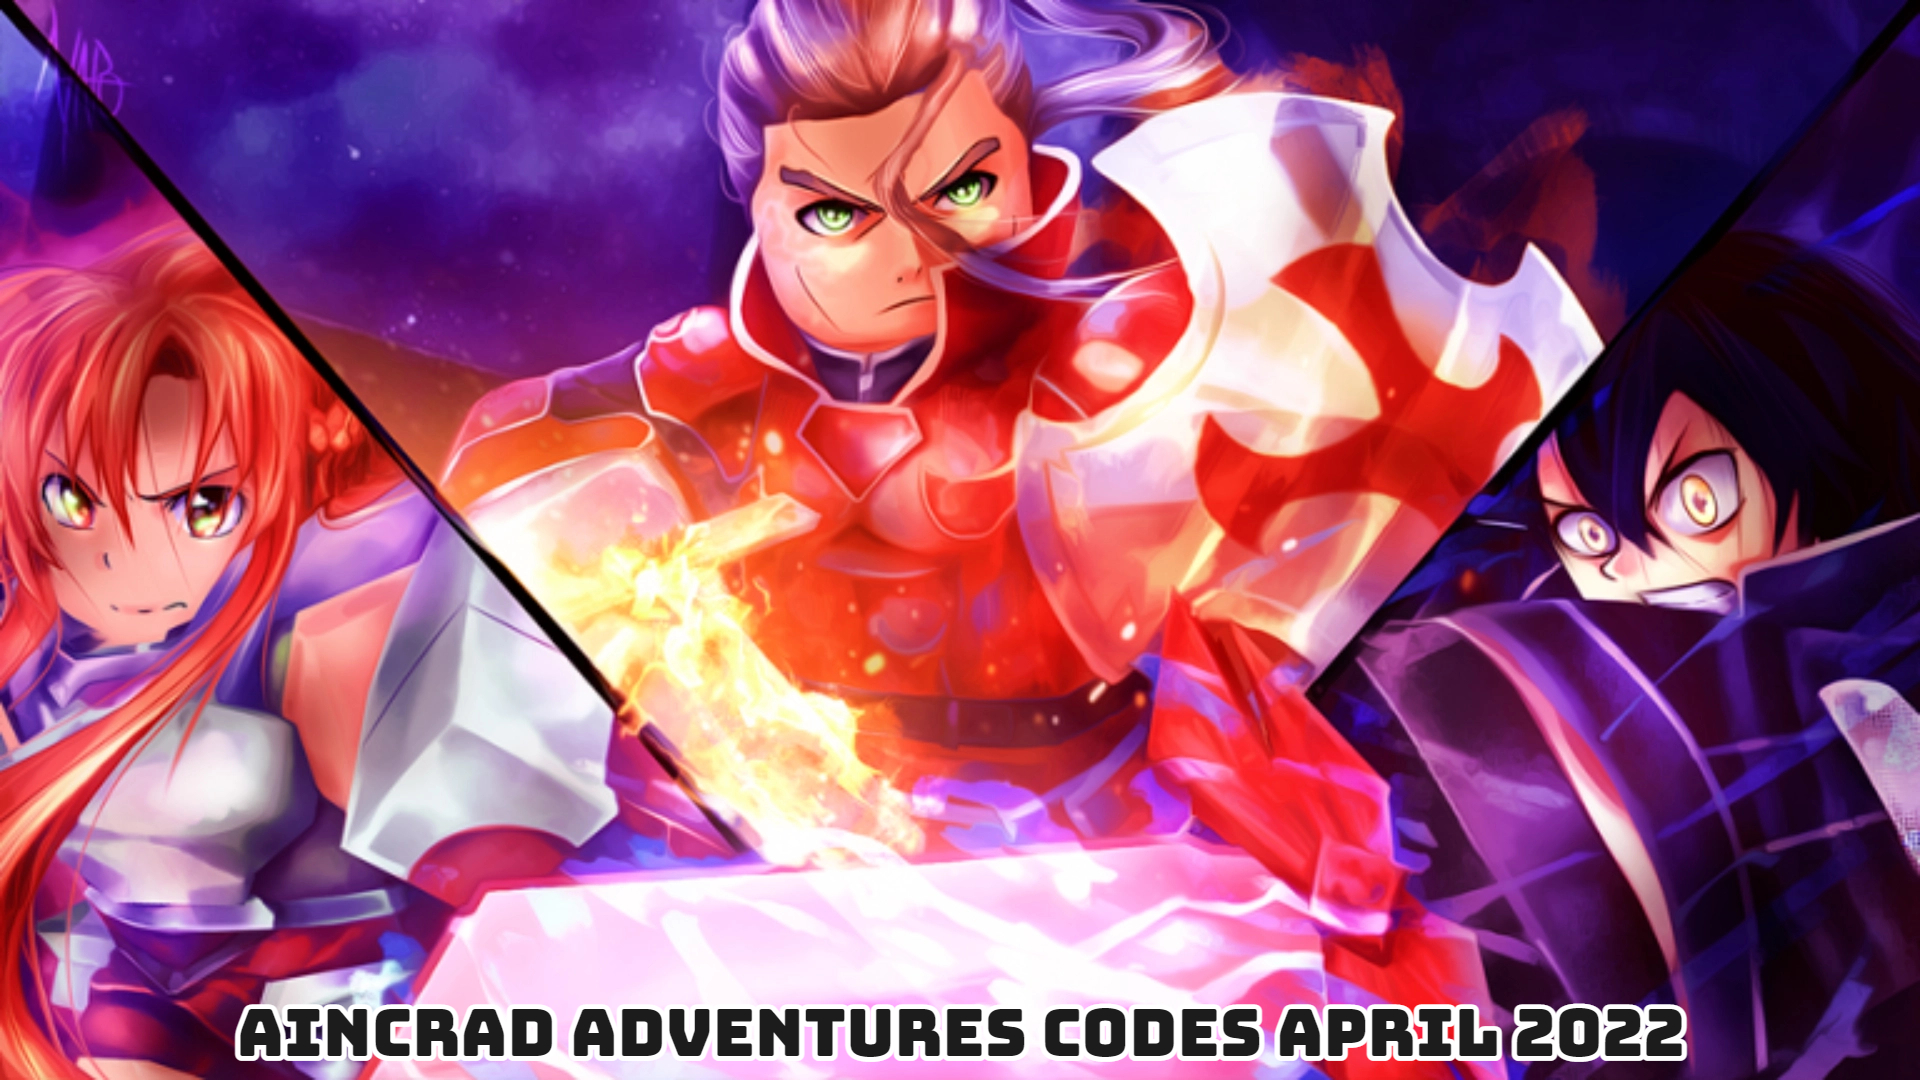 You are currently viewing Aincrad Adventures Codes Today 4 April 2022